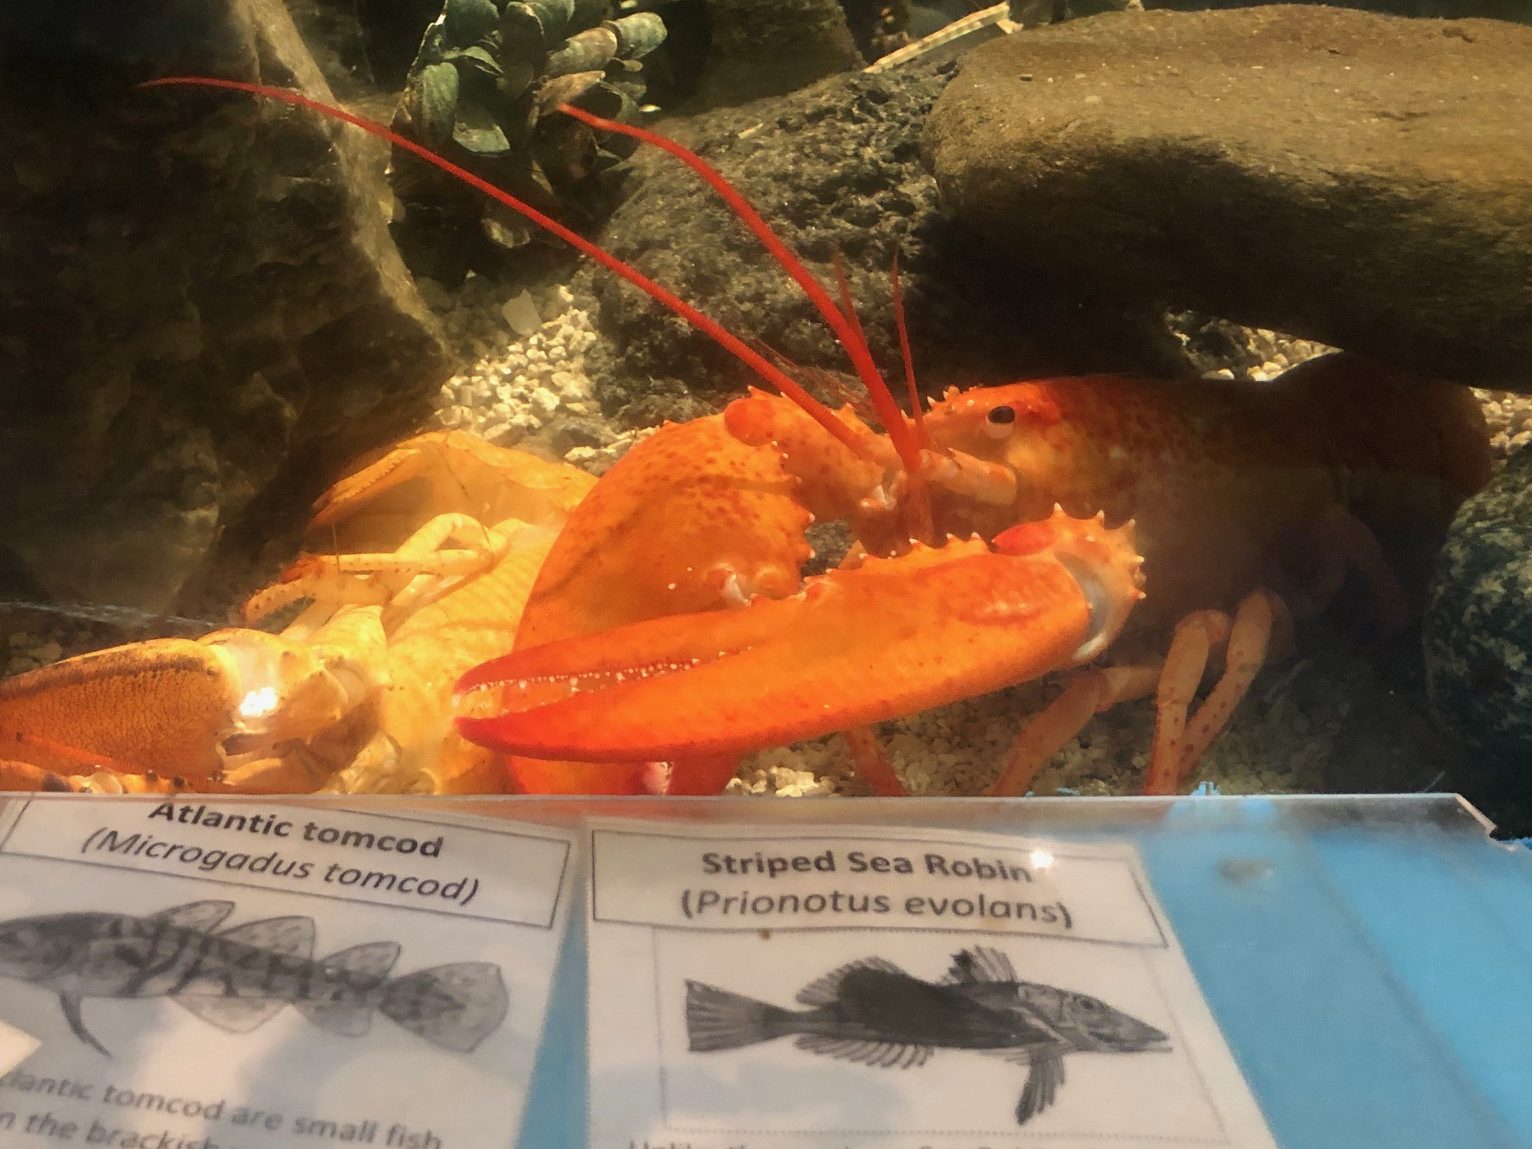 The Exploration Center and Aquarium had a special guest October 2019: a rare one-in-30-million orange lobster!